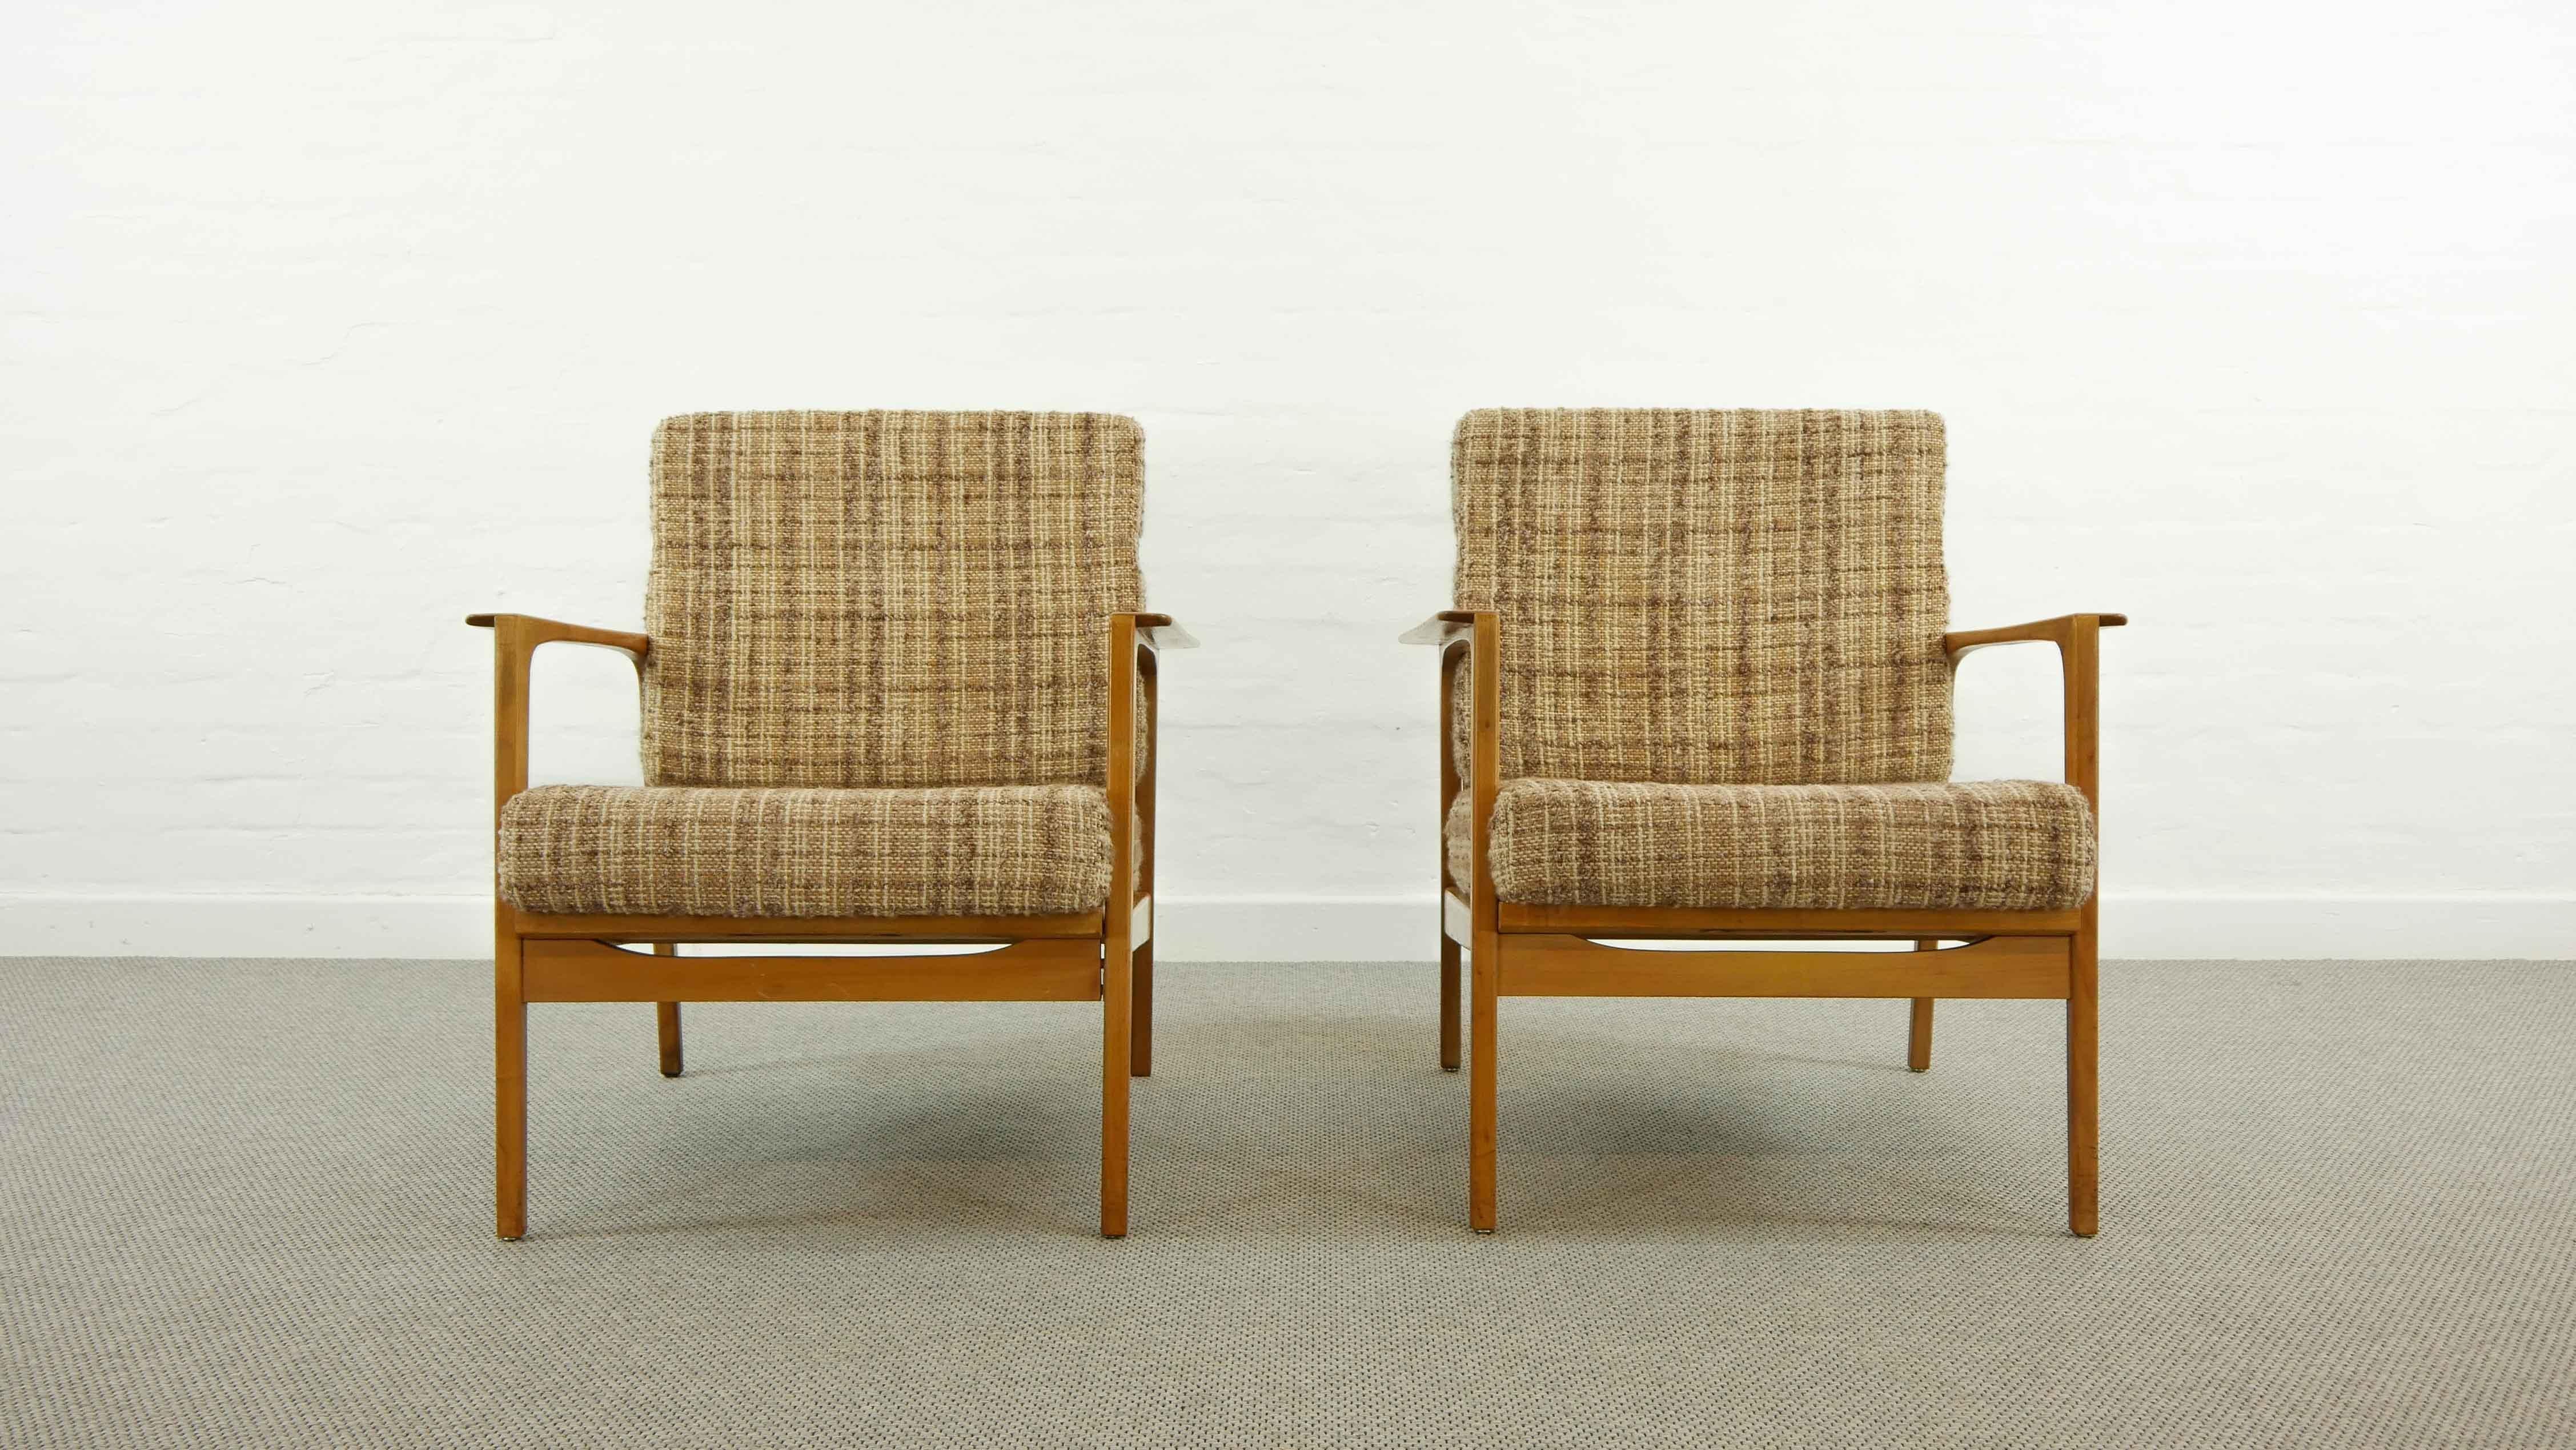 Pair of midcentury Armchairs, Convertible 1960s Lounge-Chairs of Solid Beech In Good Condition For Sale In Halle, DE